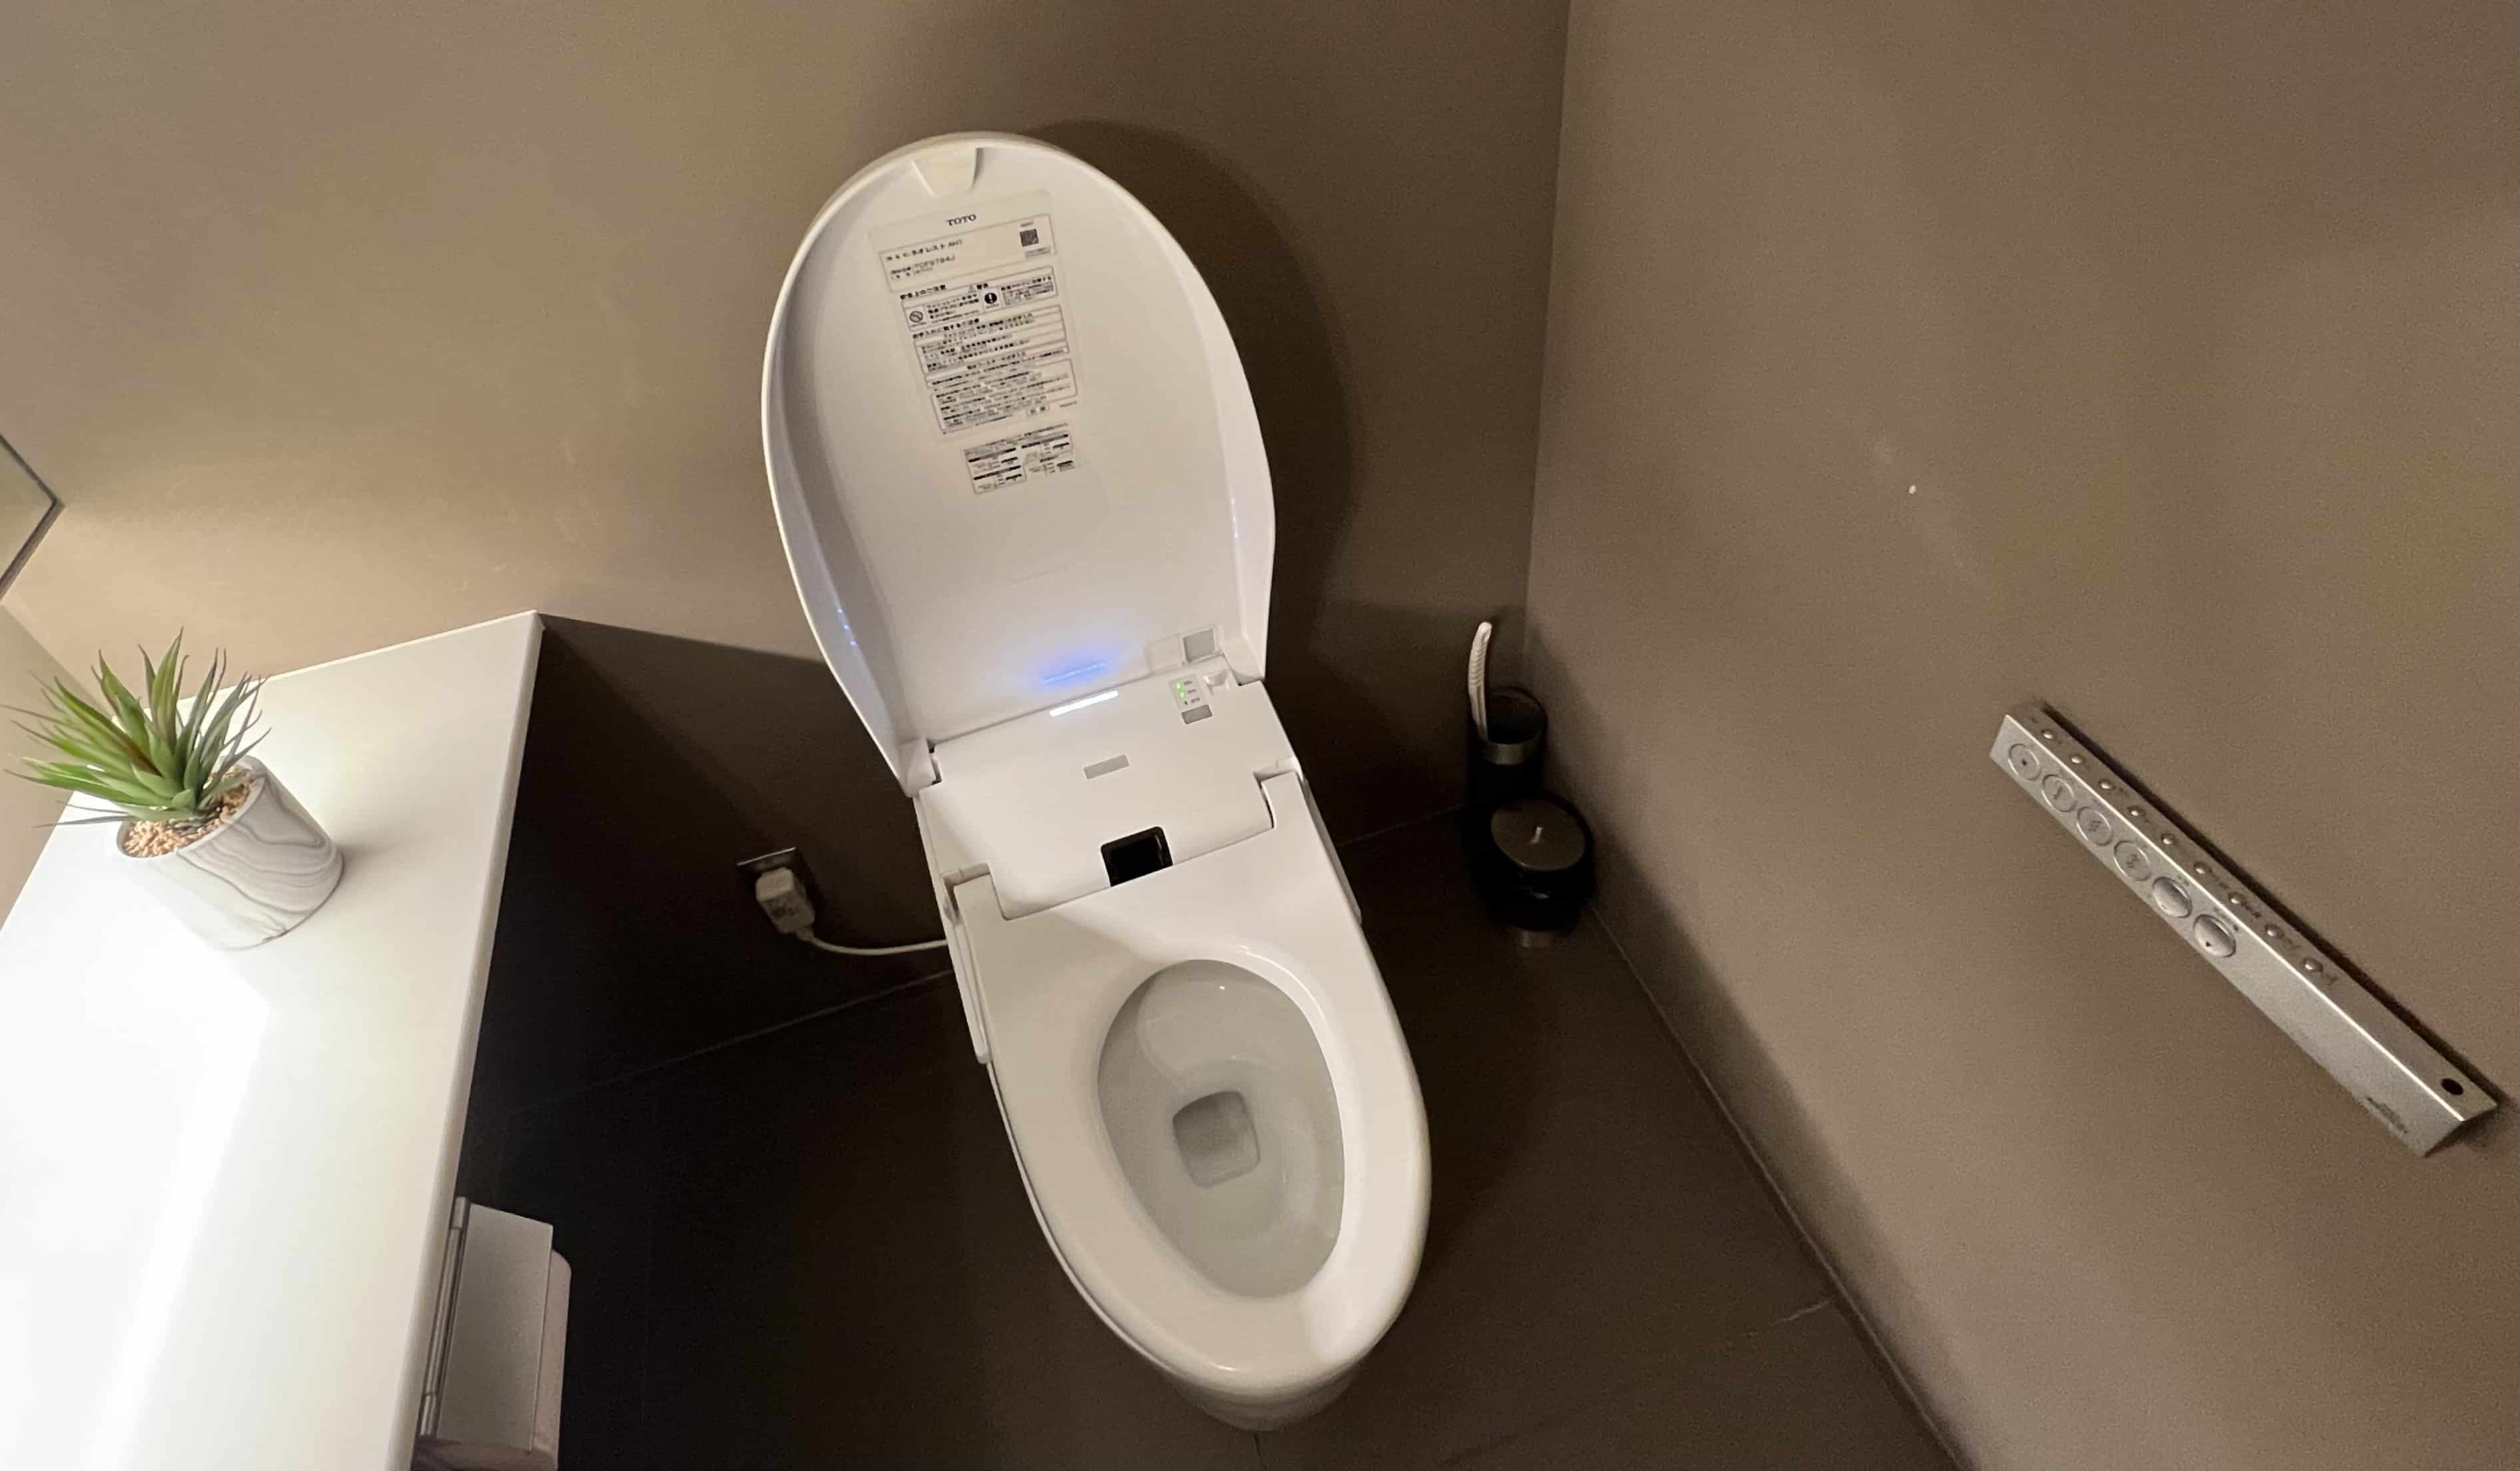 Visitors to Japan love the high-tech toilets, like this one with a row of buttons on the wall to control various features.